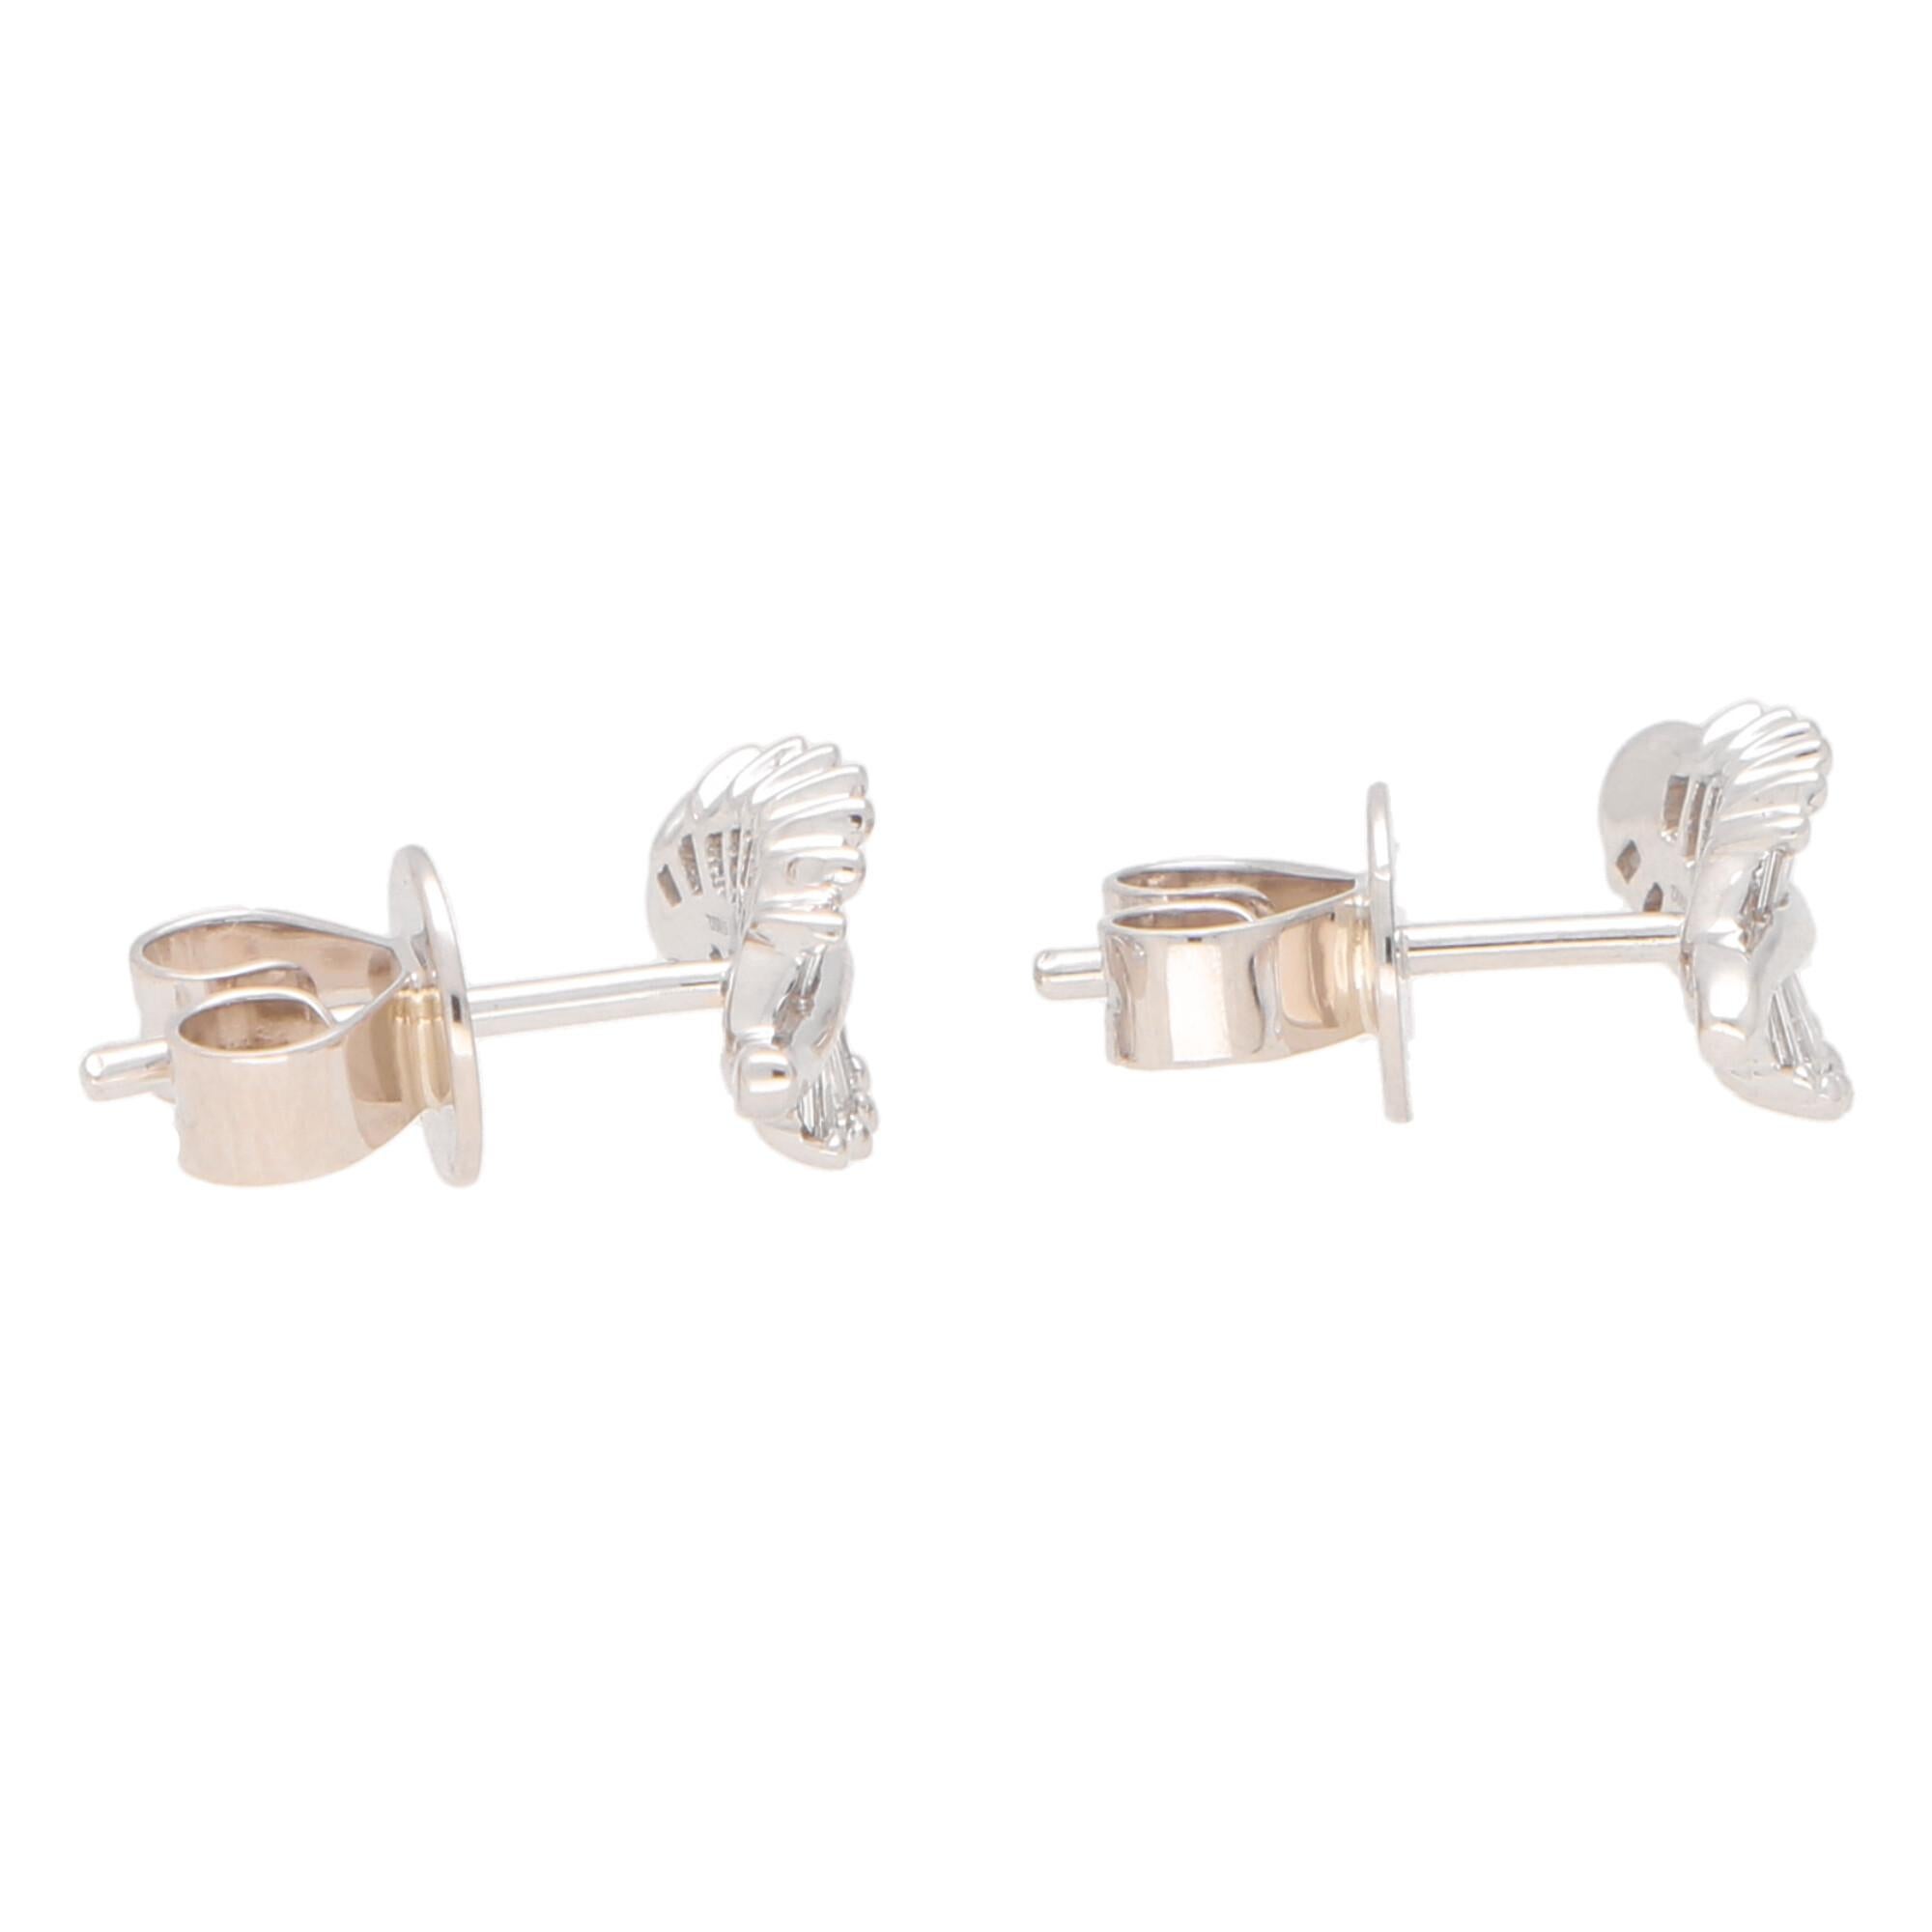  A lovely little pair of diamond leaf stud earrings set in 18k white gold.

These beautiful little studs are each individually set with 13 tapered baguette cut diamonds claw set to depict the grooves of a natural leaf. Due to the design these studs